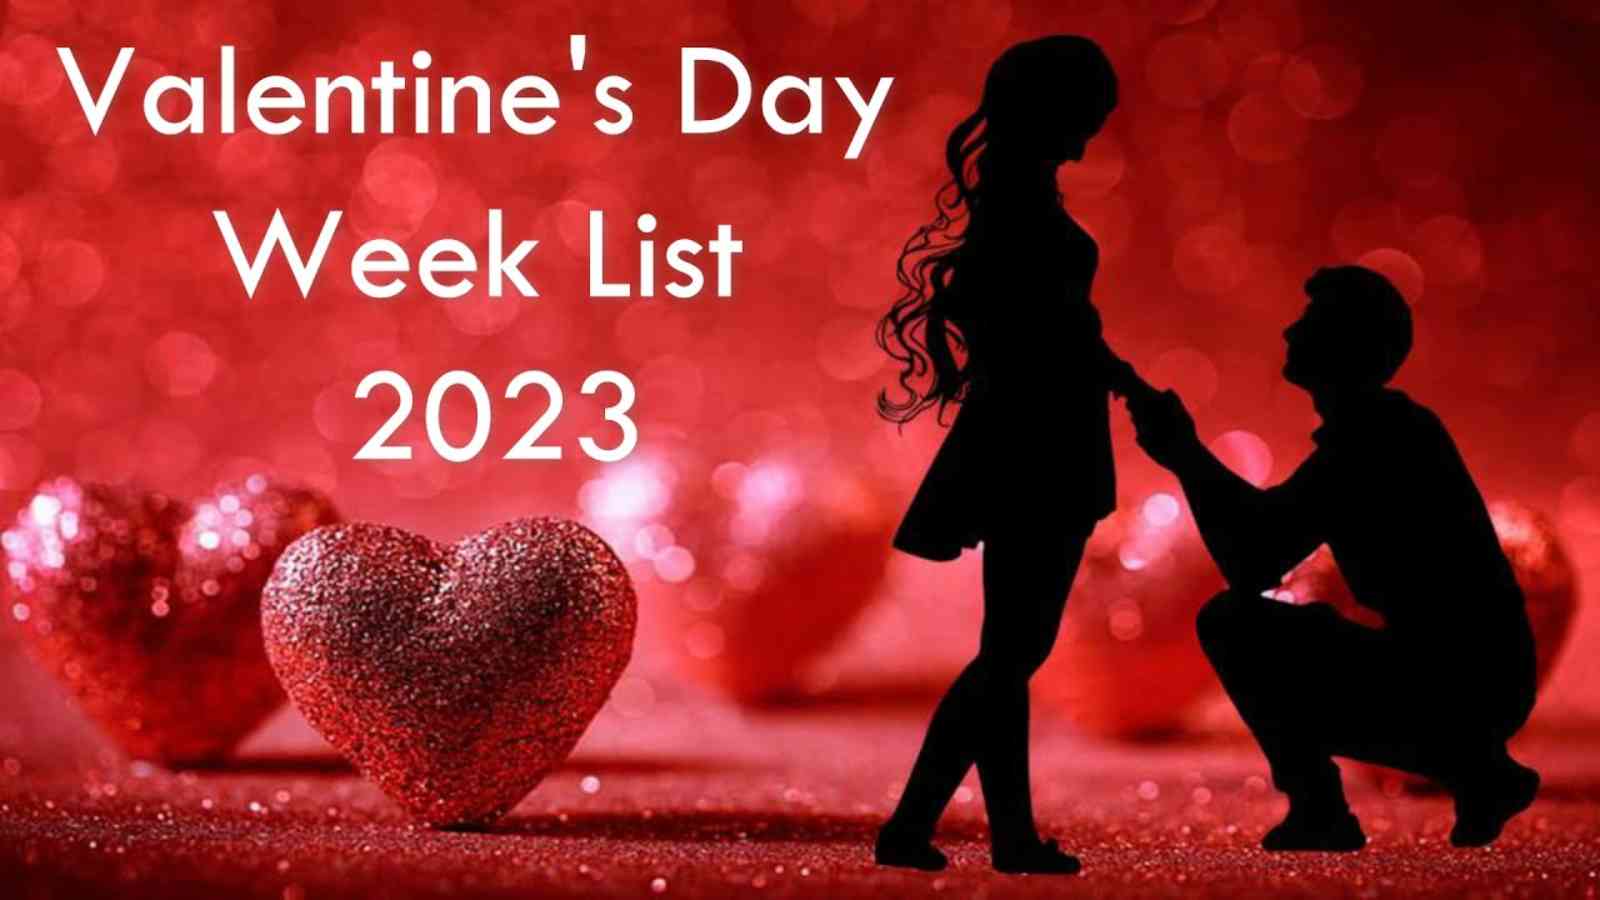 Saint Valentine’s Day 2023: Date, Theme, Activities, History and Quotes